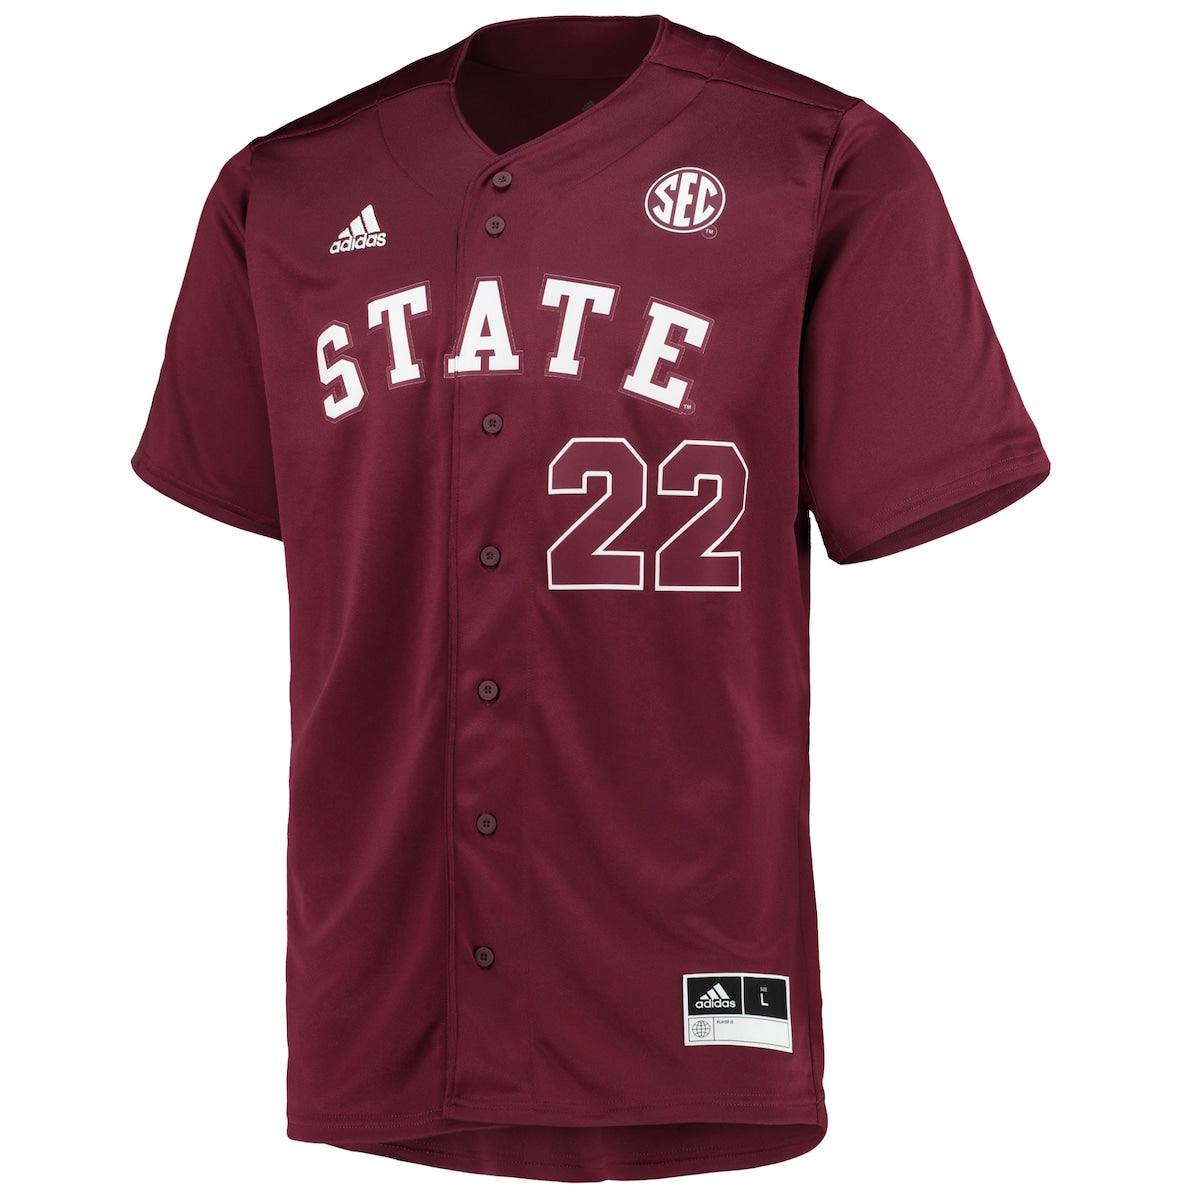 Men's Adidas #22 Maroon Mississippi State Bulldogs Button-Up Baseball Jersey